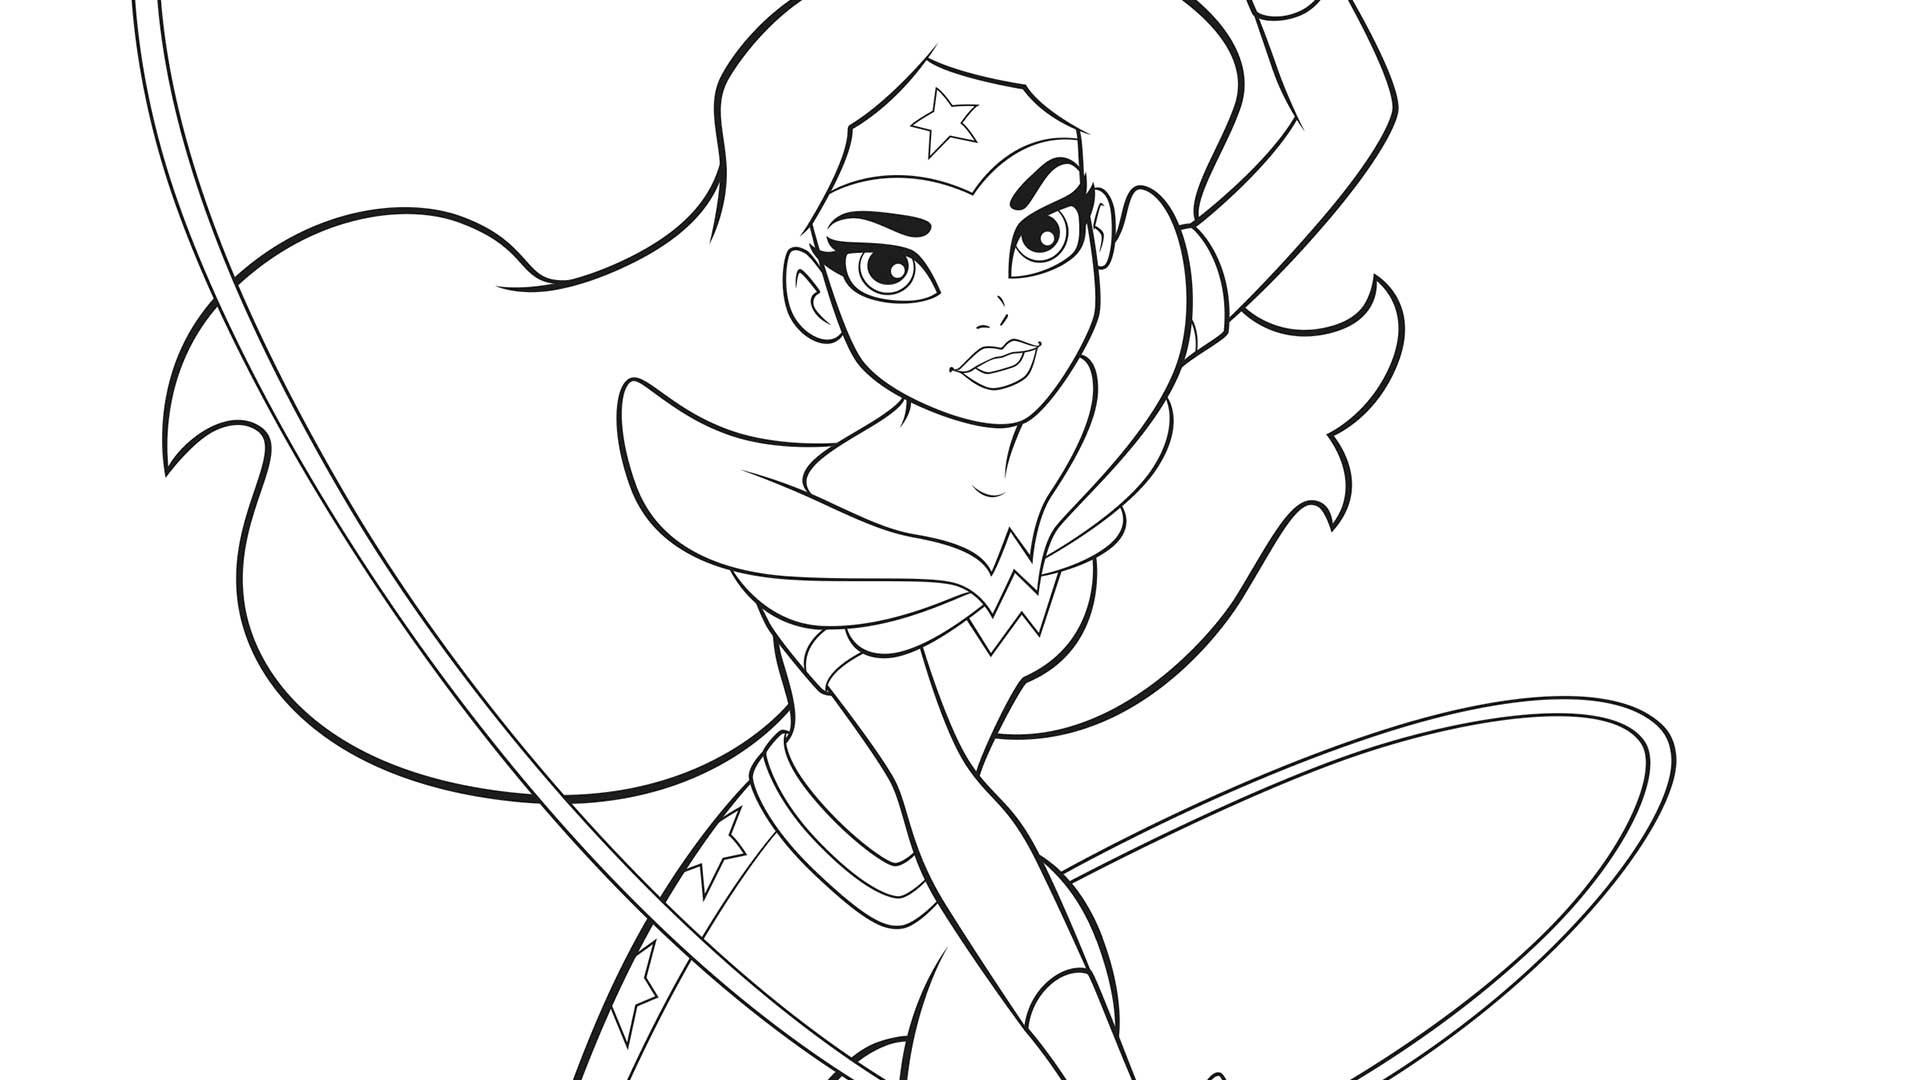 Girl Superhero Coloring Pages Free
 DC SUPER HERO GIRLS A KIDS COLORING BOOK